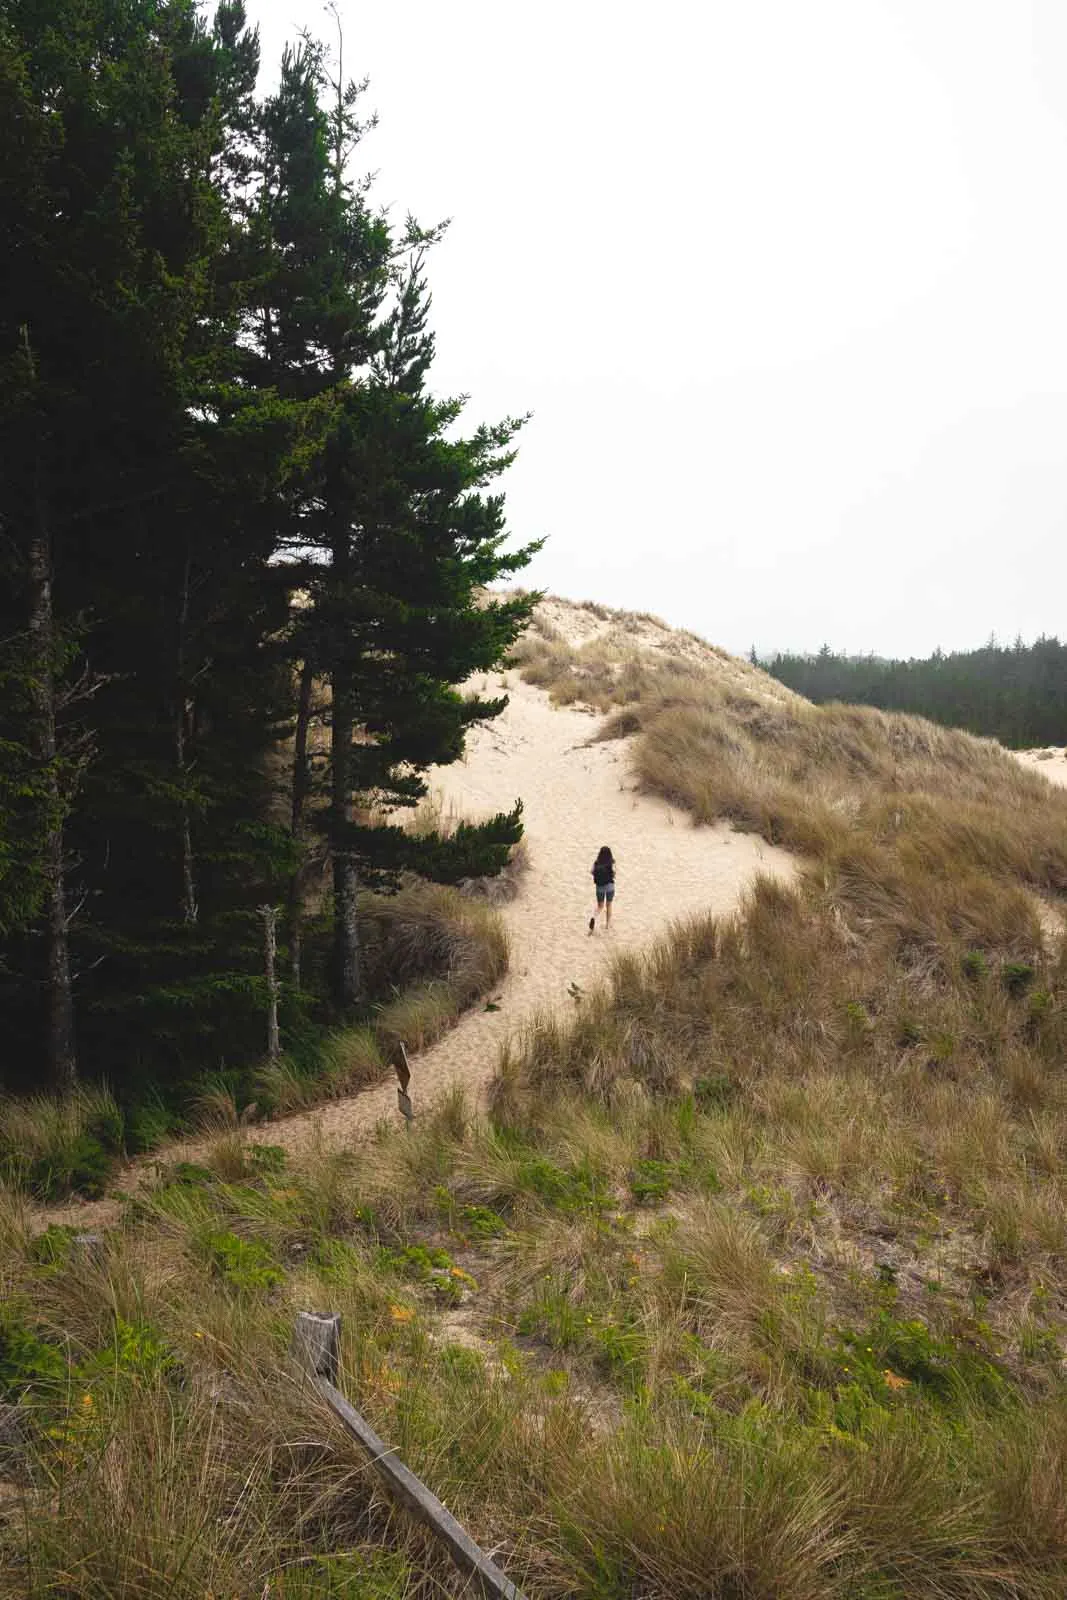 The Oregon Dunes NRA trail is a fun hike when visiting the Oregon sand dunes.